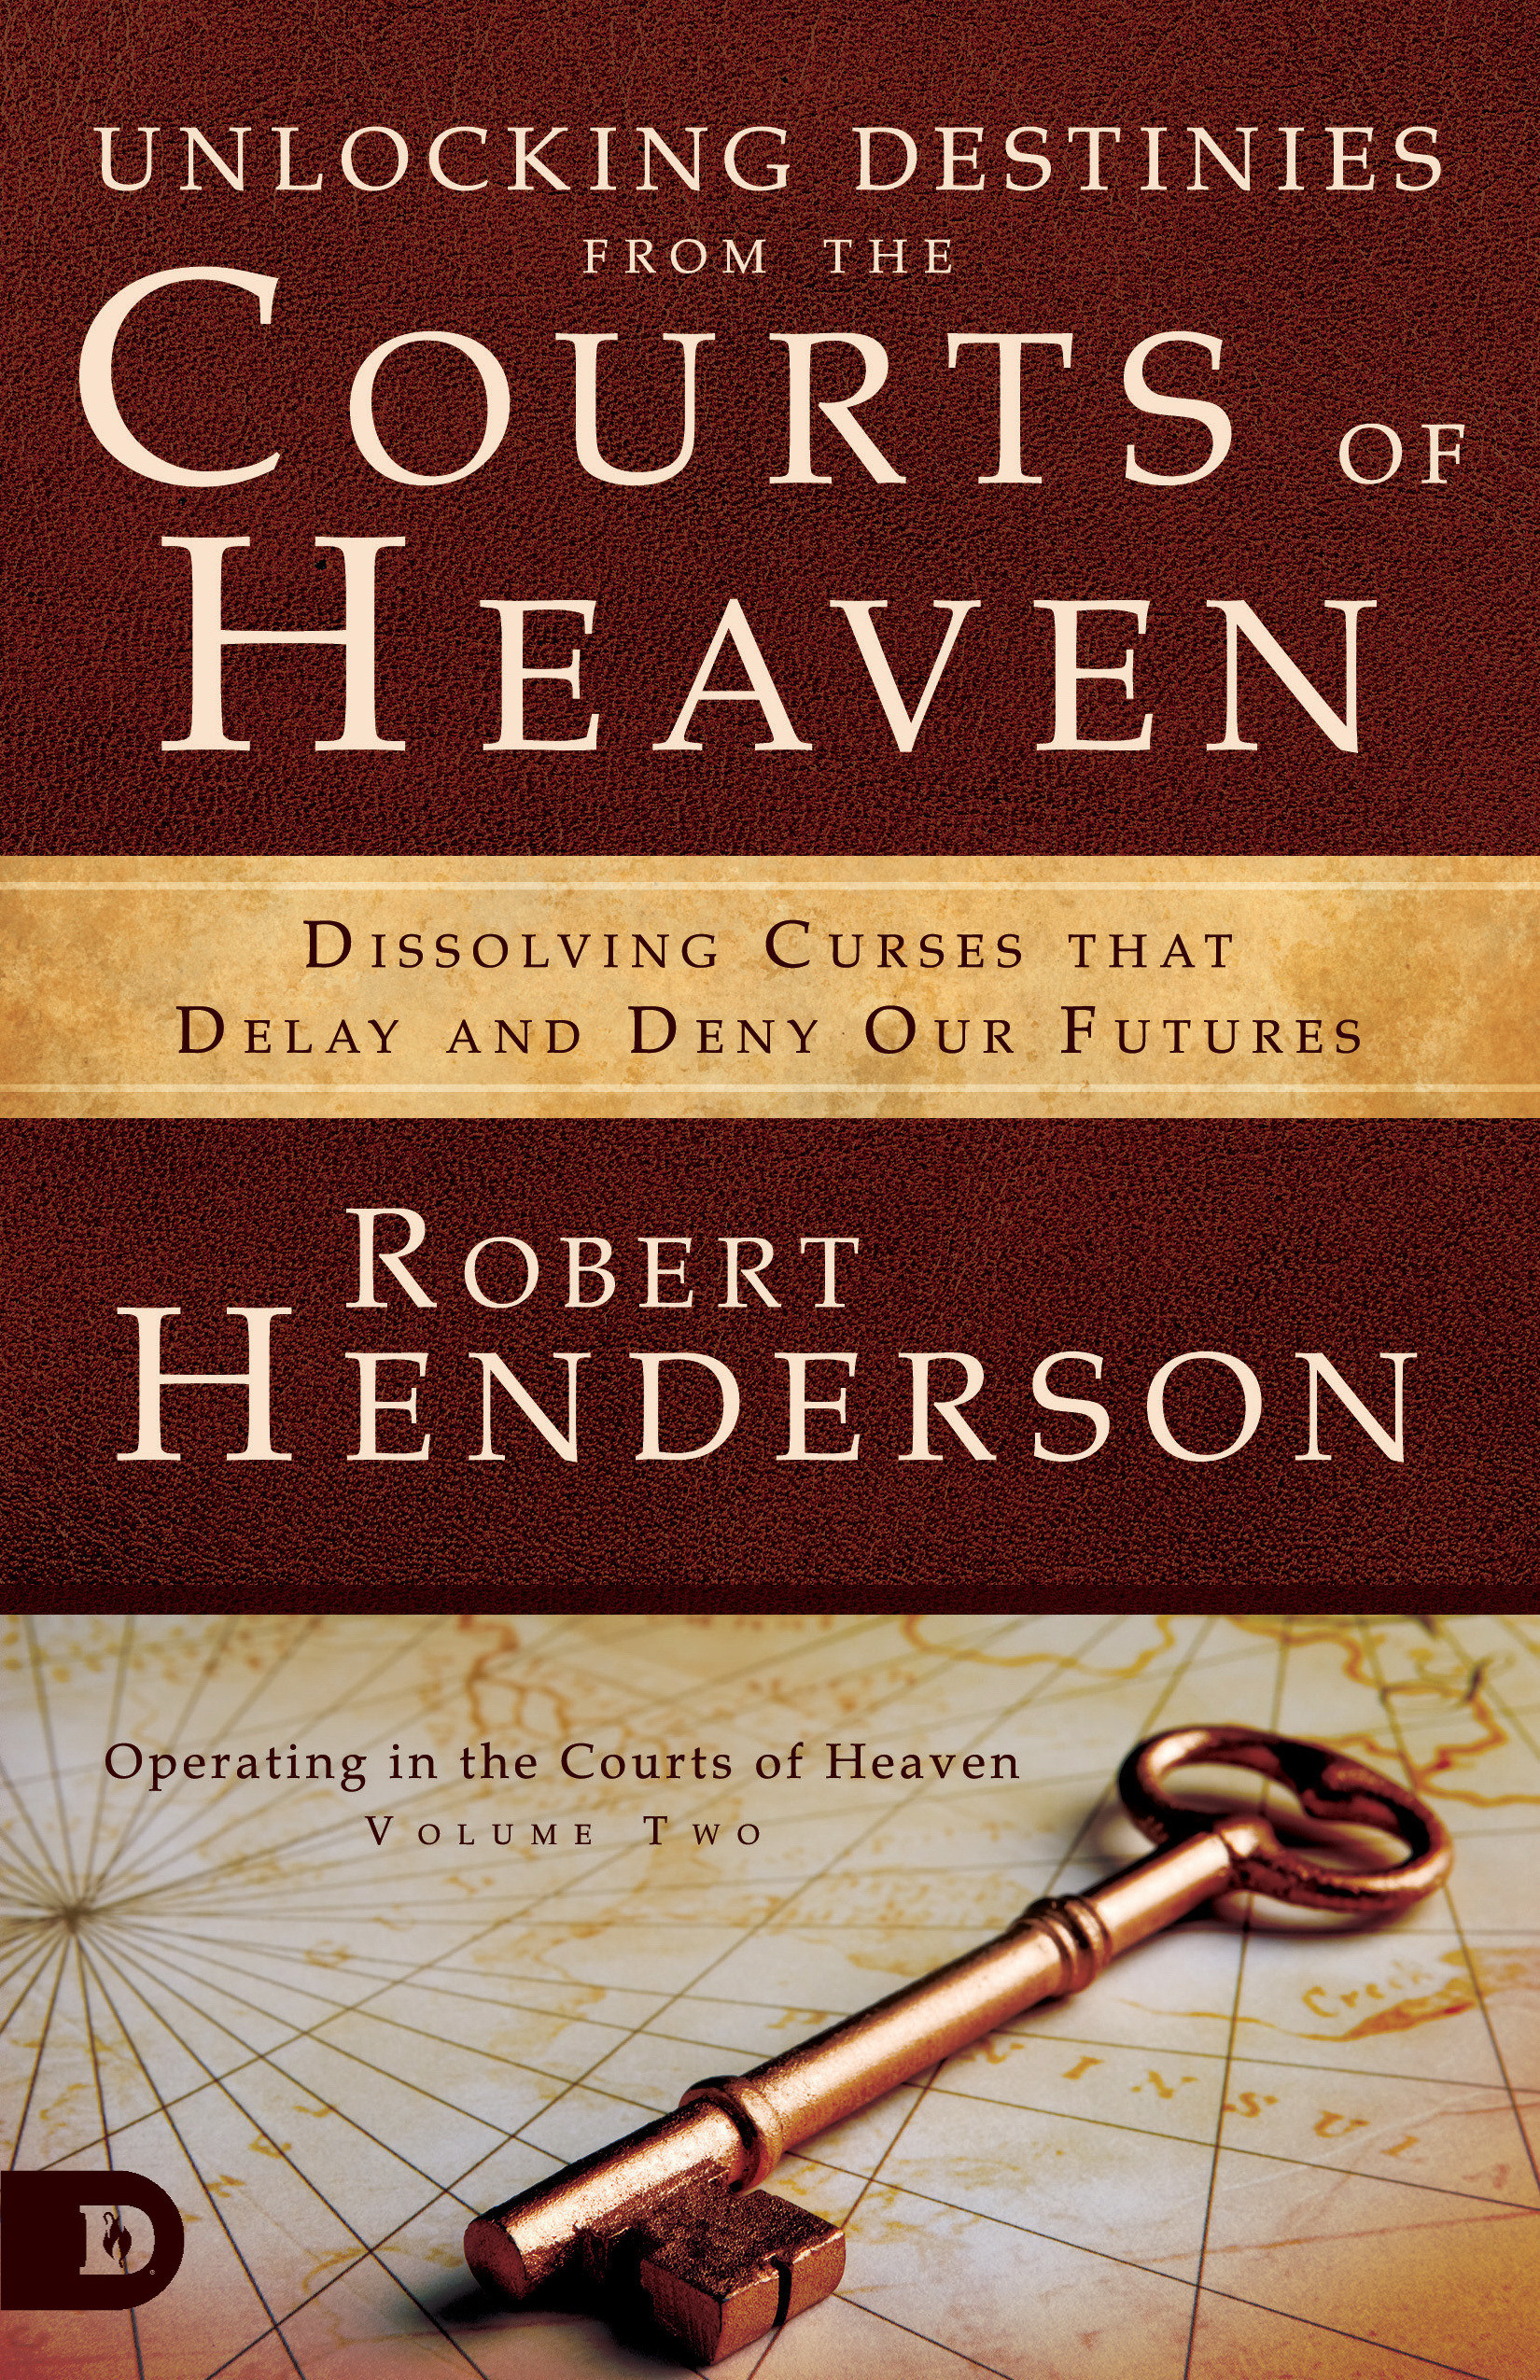 Unlocking Destinies From the Courts of Heaven by Henderson Robert